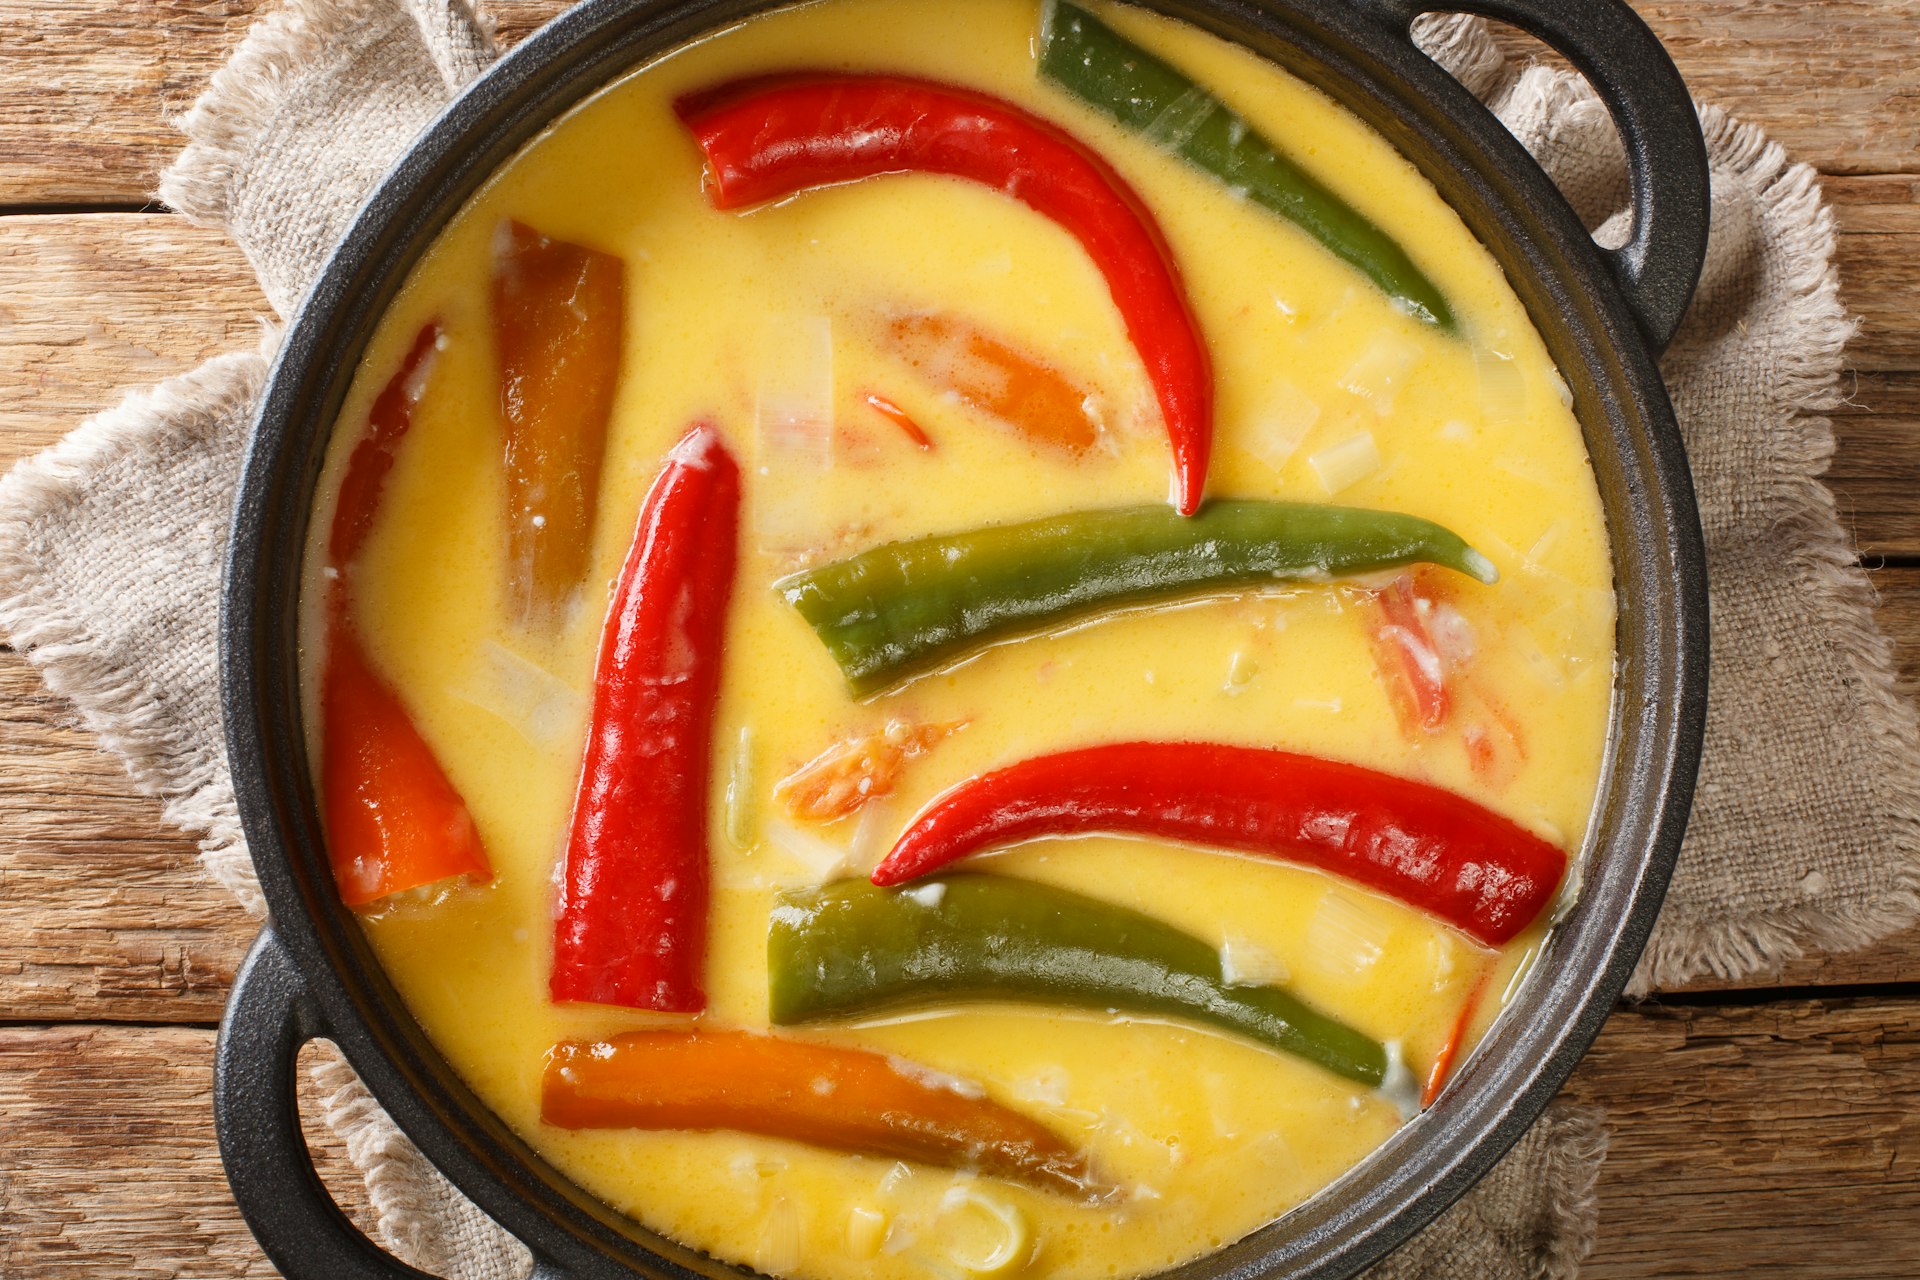 A top-down view of pan of chilies and cheese, or ema datse, the national dish of Bhutan